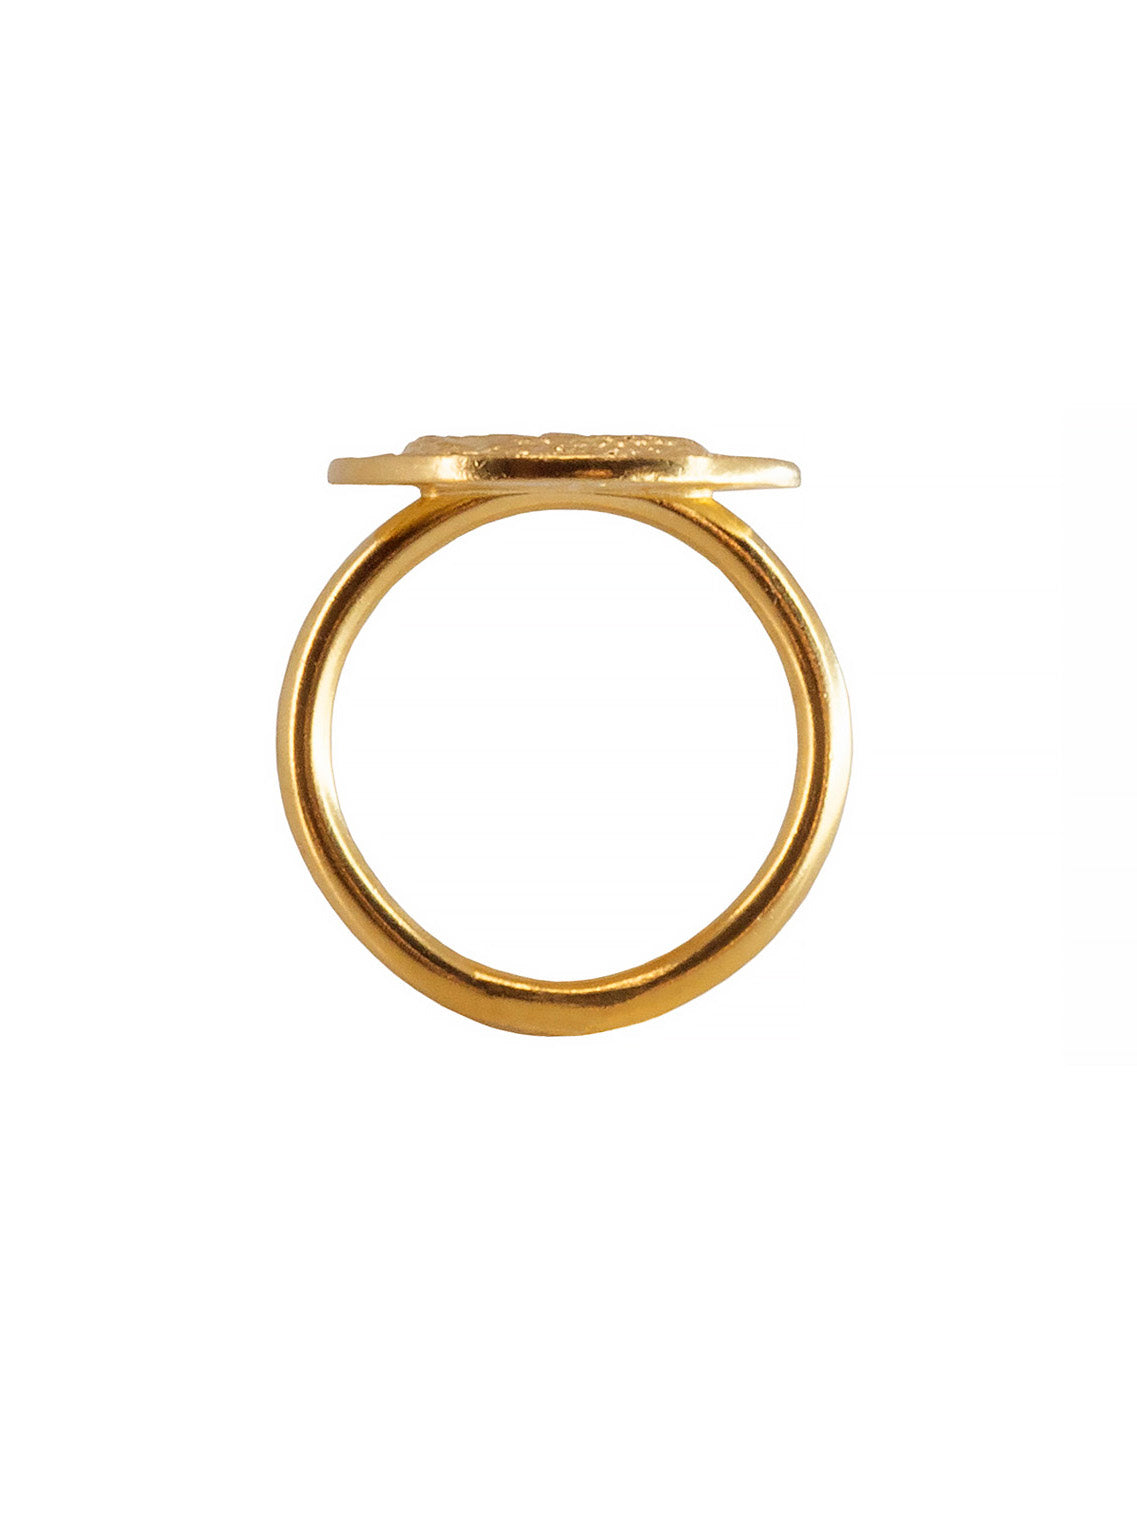 Blood type Ring. Gold plated Sterling Silver